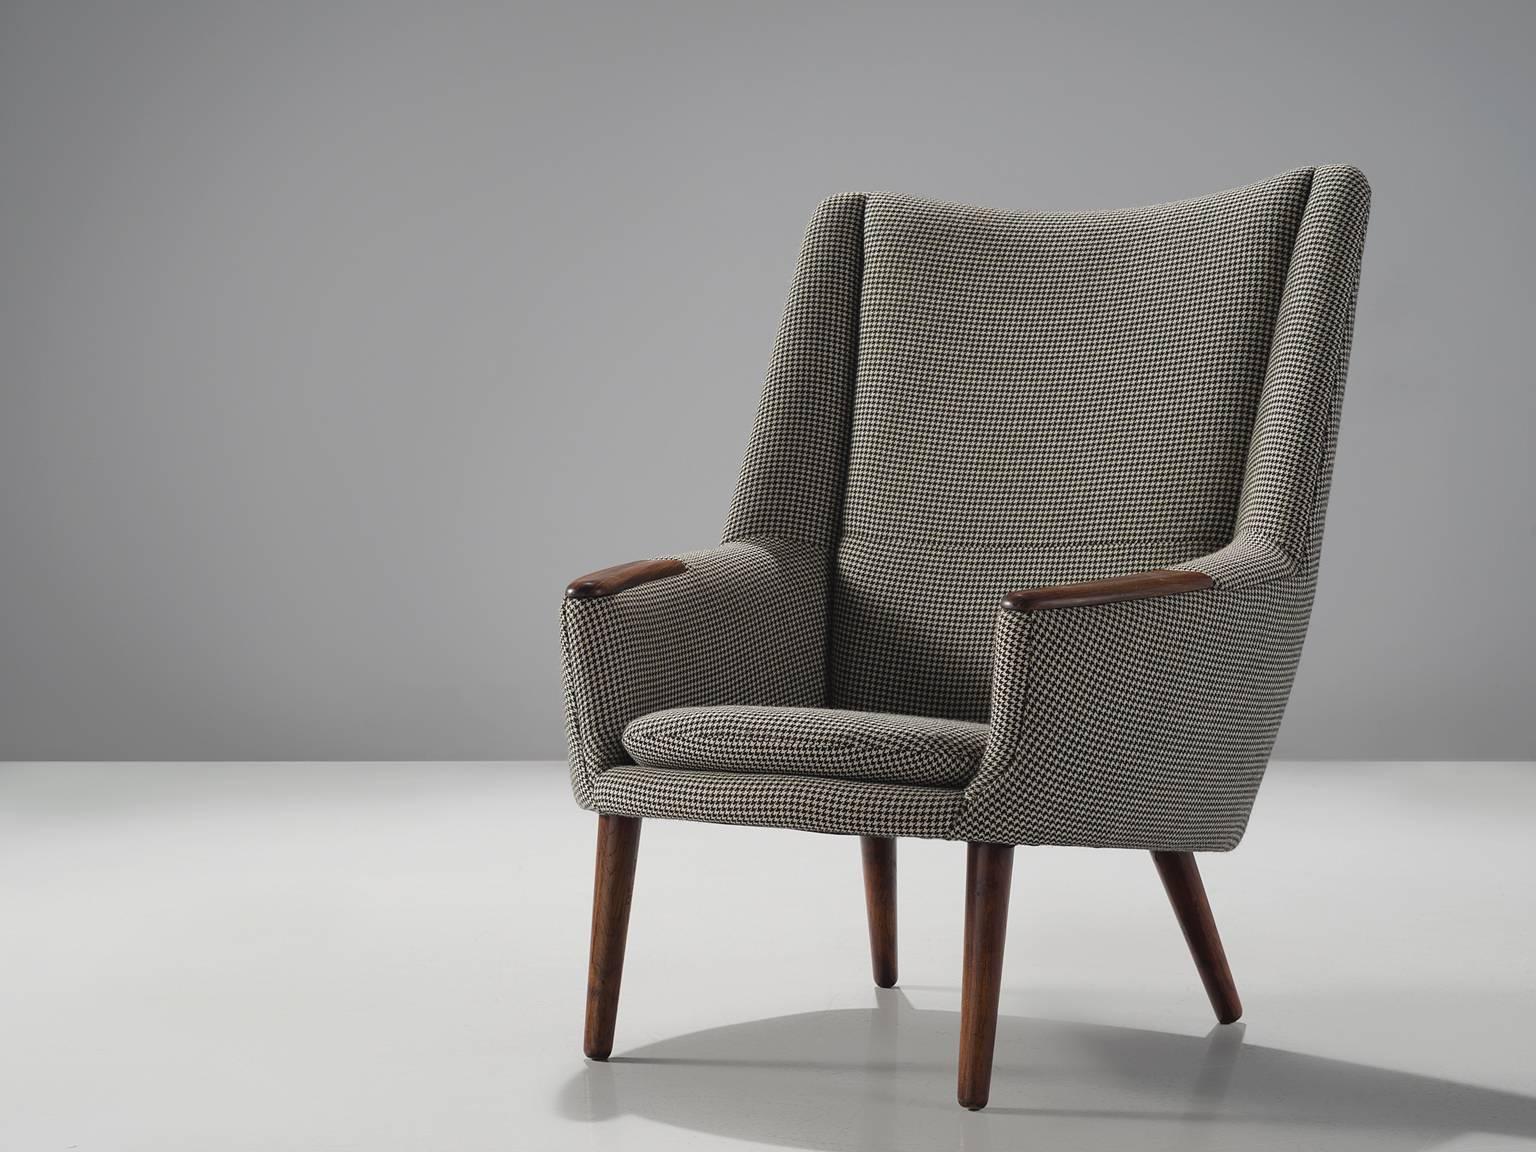 Kurt Østervig for Rolschau Møbler, armchair, fabric, rosewood, Denmark, 1958.

This armchair shows exquisite Danish craftsmanship and aesthetics. The high back chair features a slightly tilted back and comfortable cushions in both the seat and